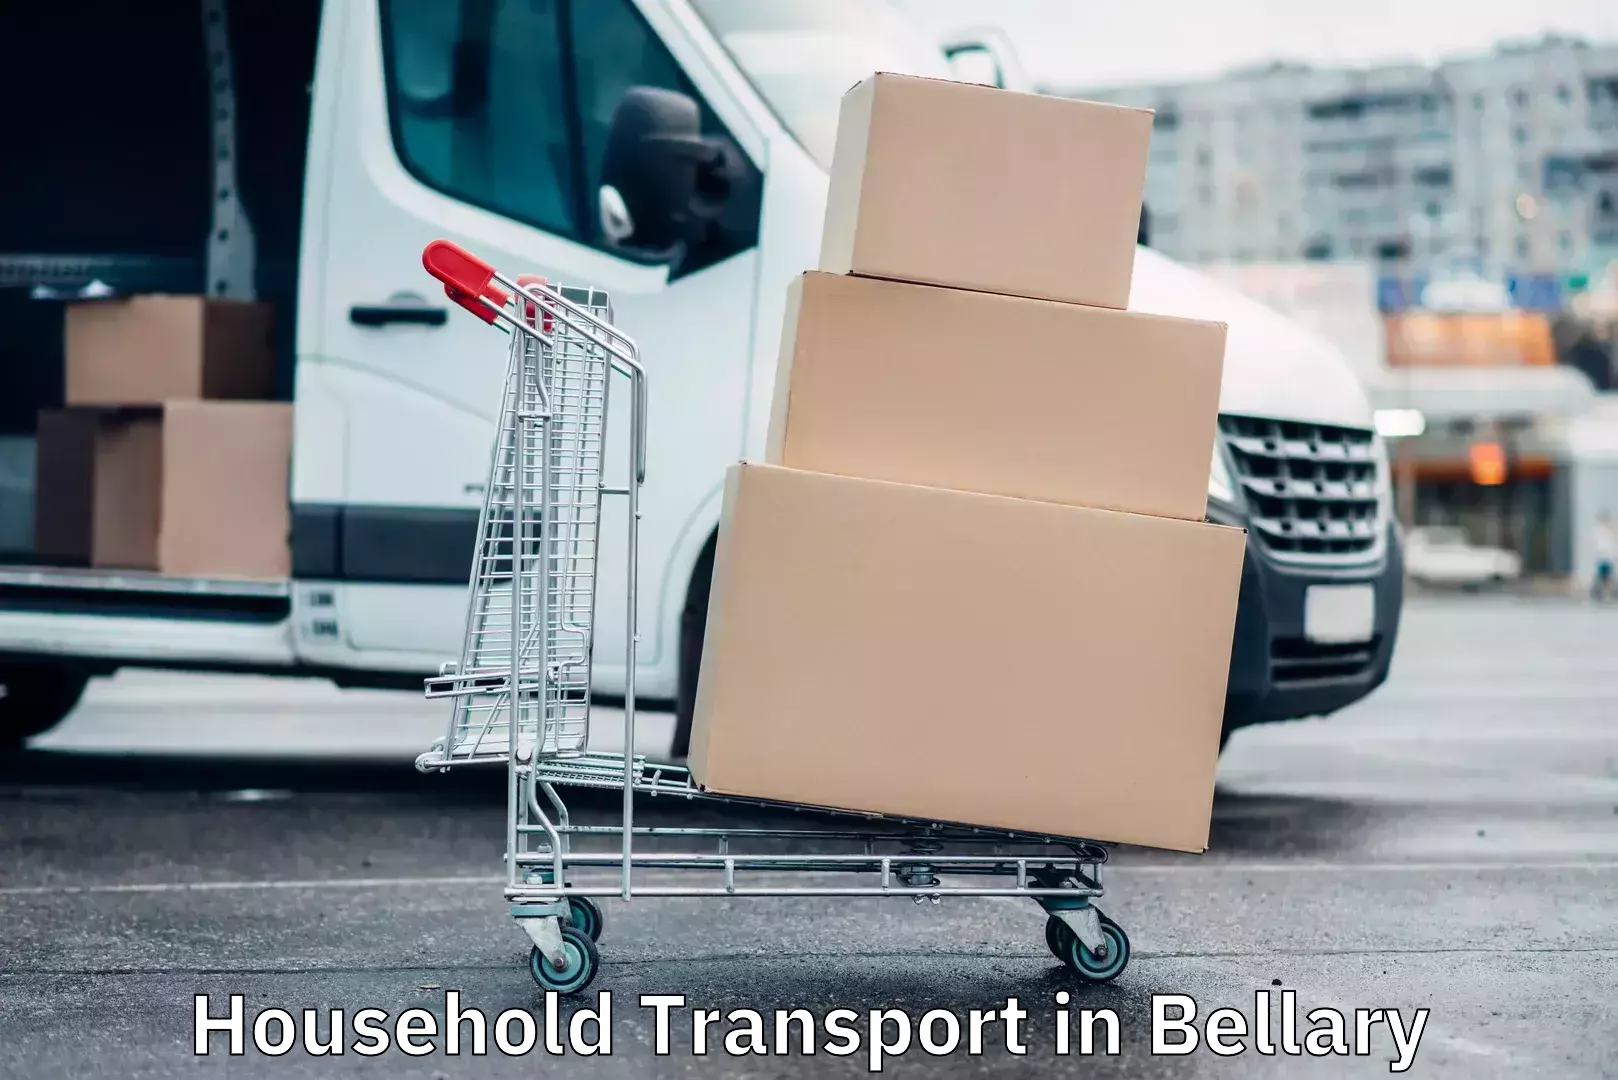 Household goods delivery in Bellary